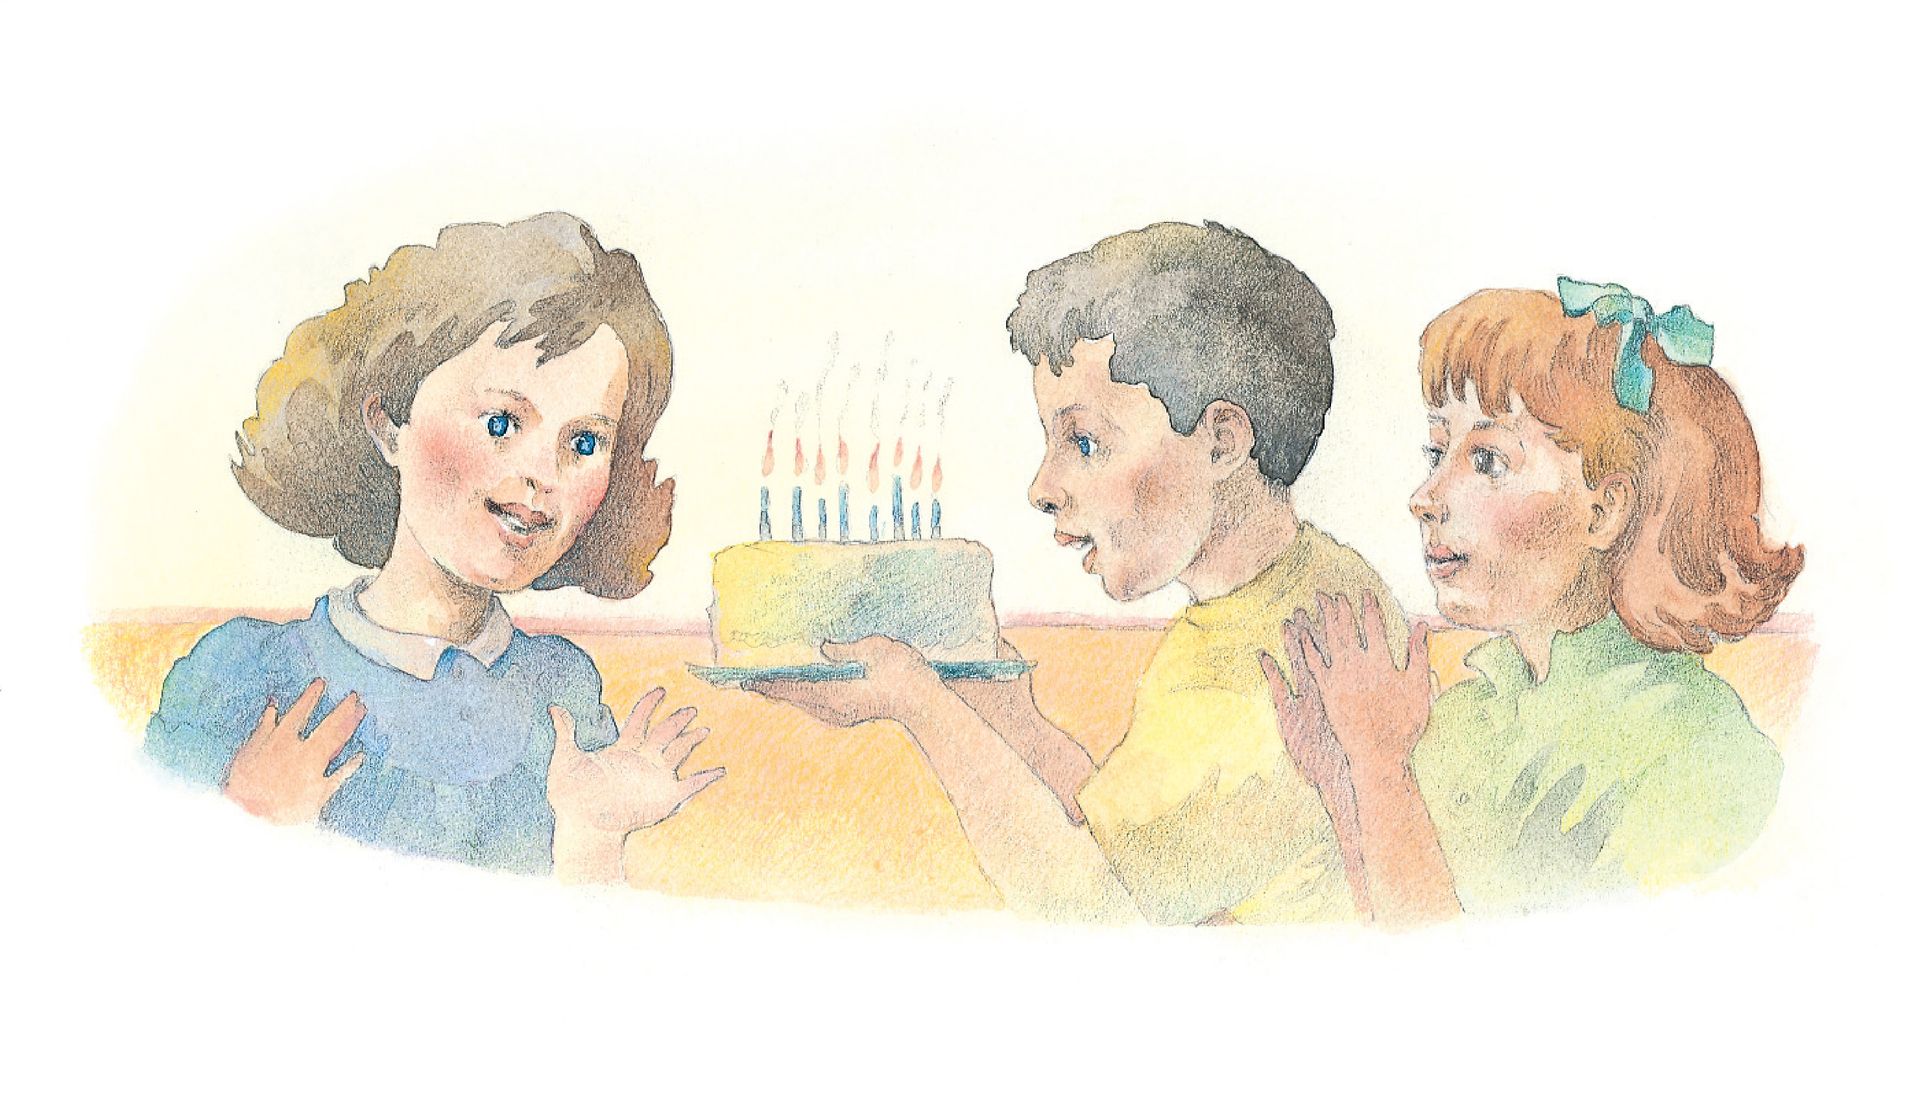 Three children gather together with a cake to celebrate a birthday. From the Children’s Songbook, page 283, “Your Happy Birthday”; watercolor illustration by Richard Hull.